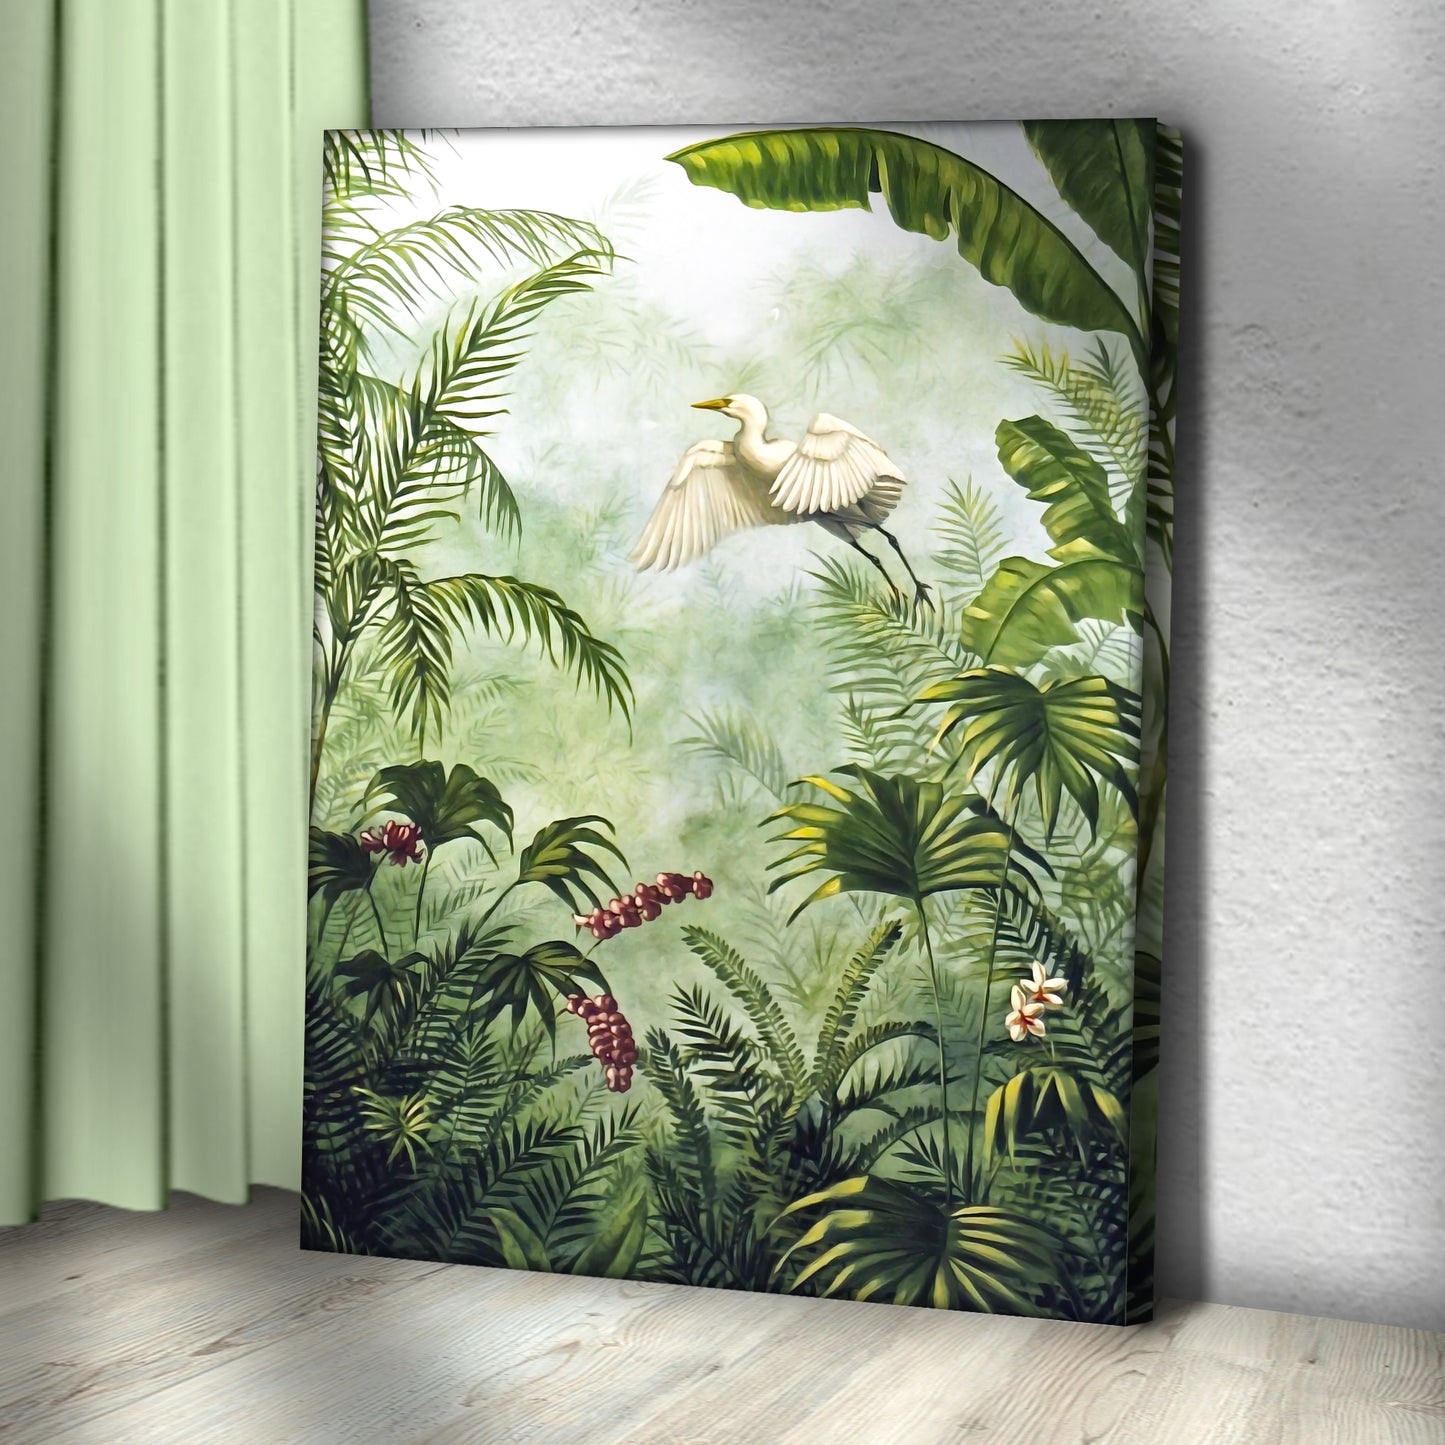 Tropical Rainforest Plants Canvas Wall Art Style Style 1 - Image by Tailored Canvases